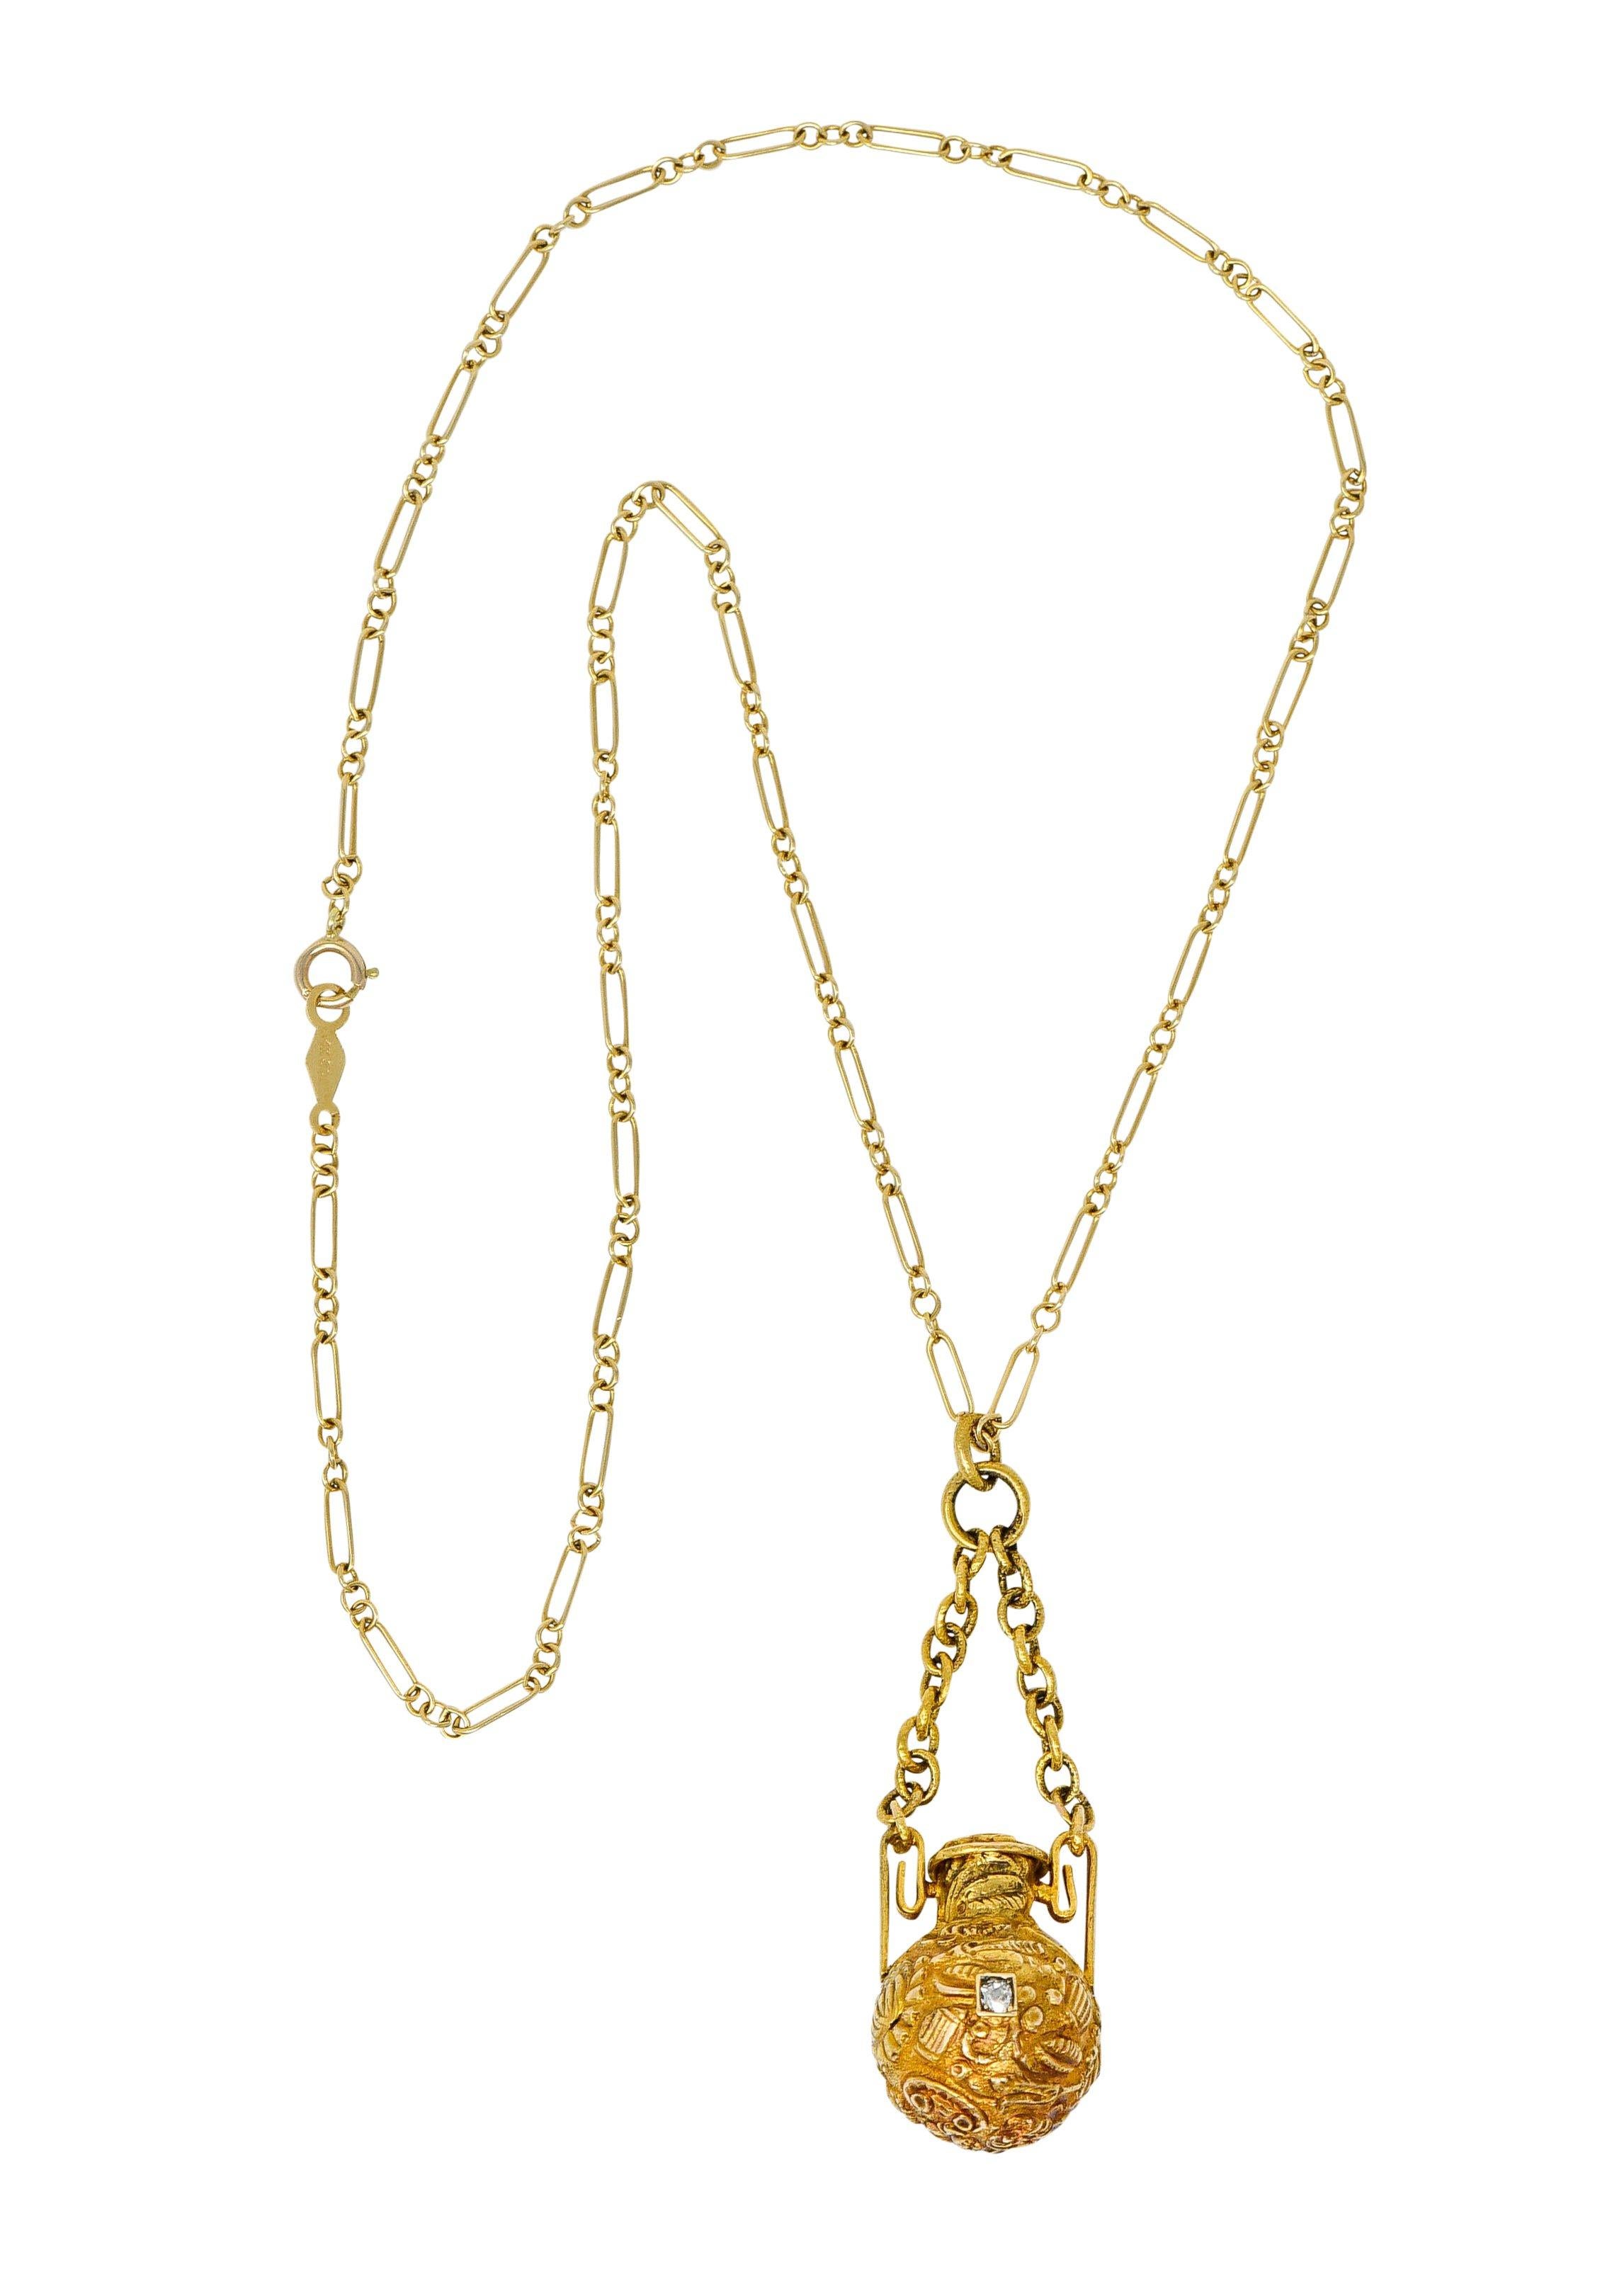 Paperclip style chain suspends a swagged amphora style container

Featuring floral and foliate repousse and a lid that opens on a hinge

Accented by a bead set ruby, sapphire, and diamond weighing in total approximately 0.47 carat

Completed by a